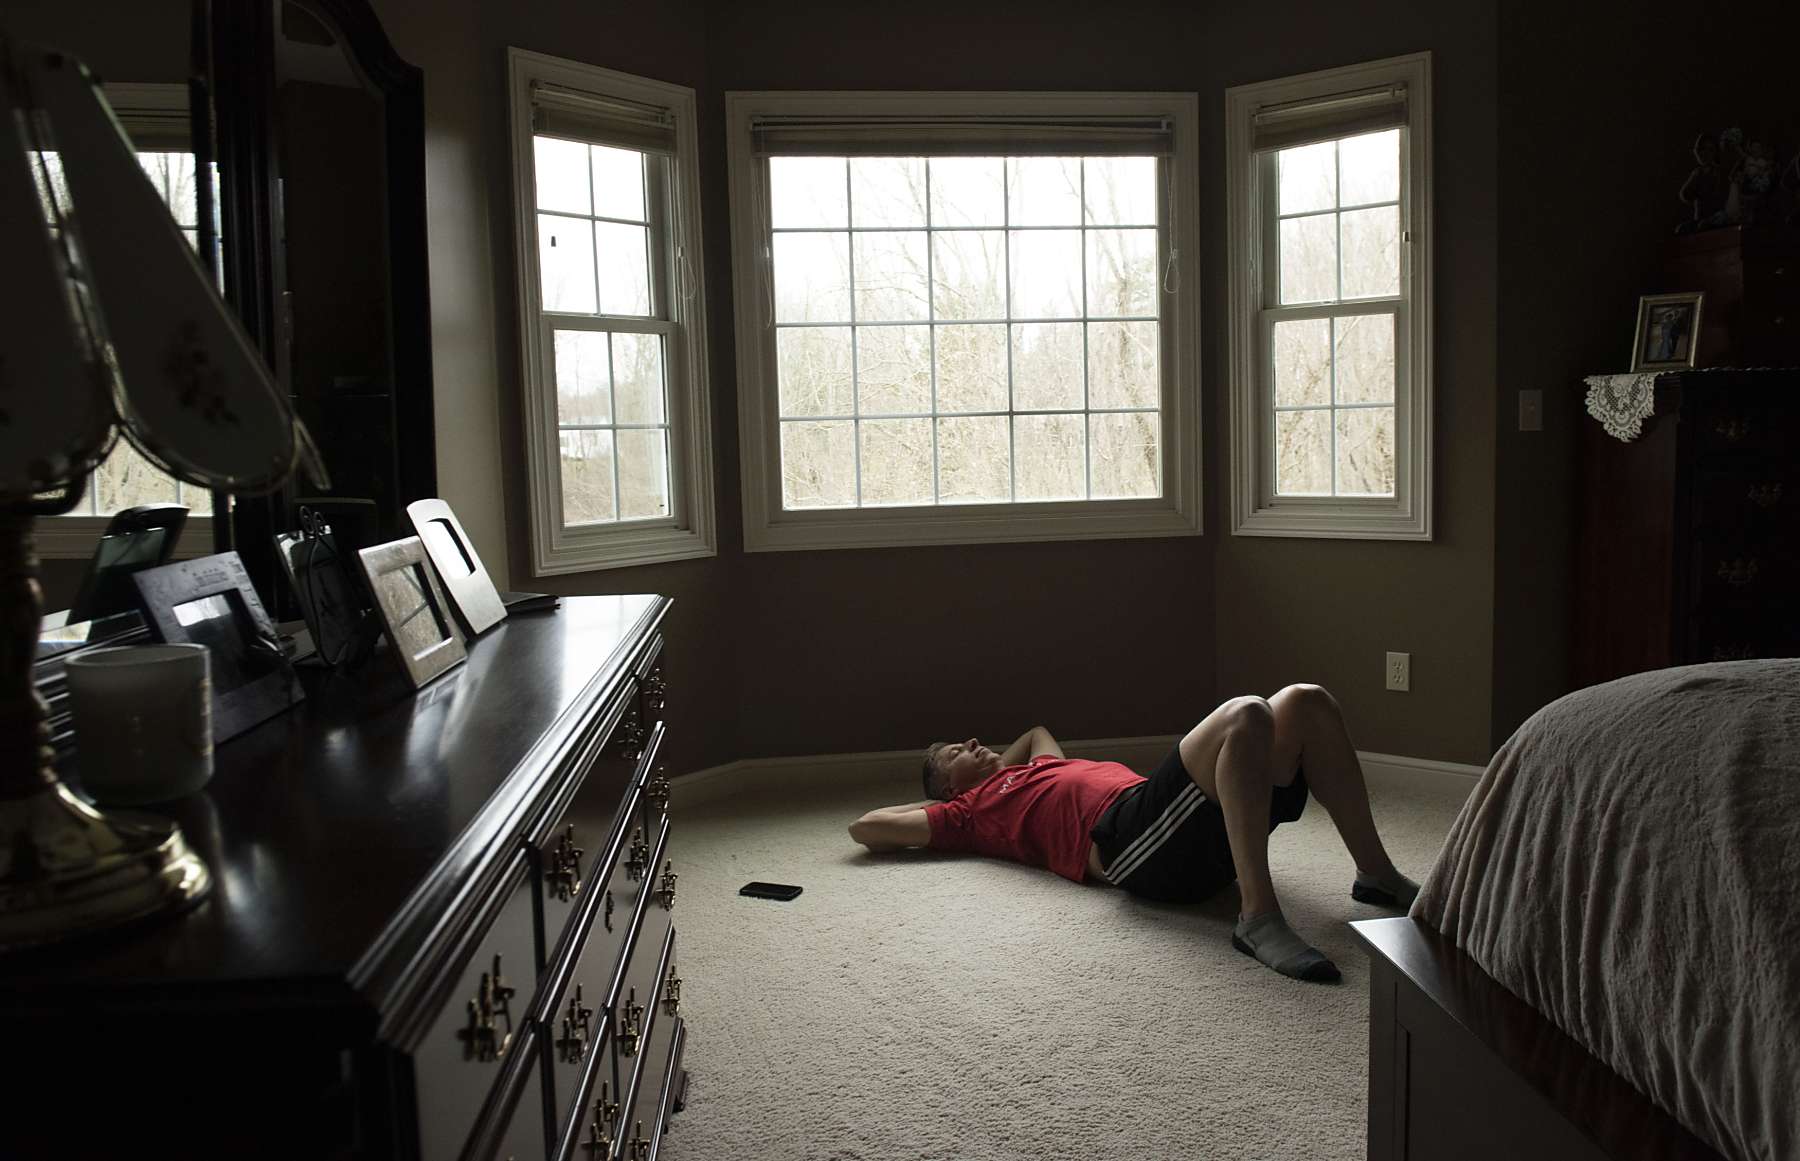 A man lying on the floor of a wide room in front of large windows